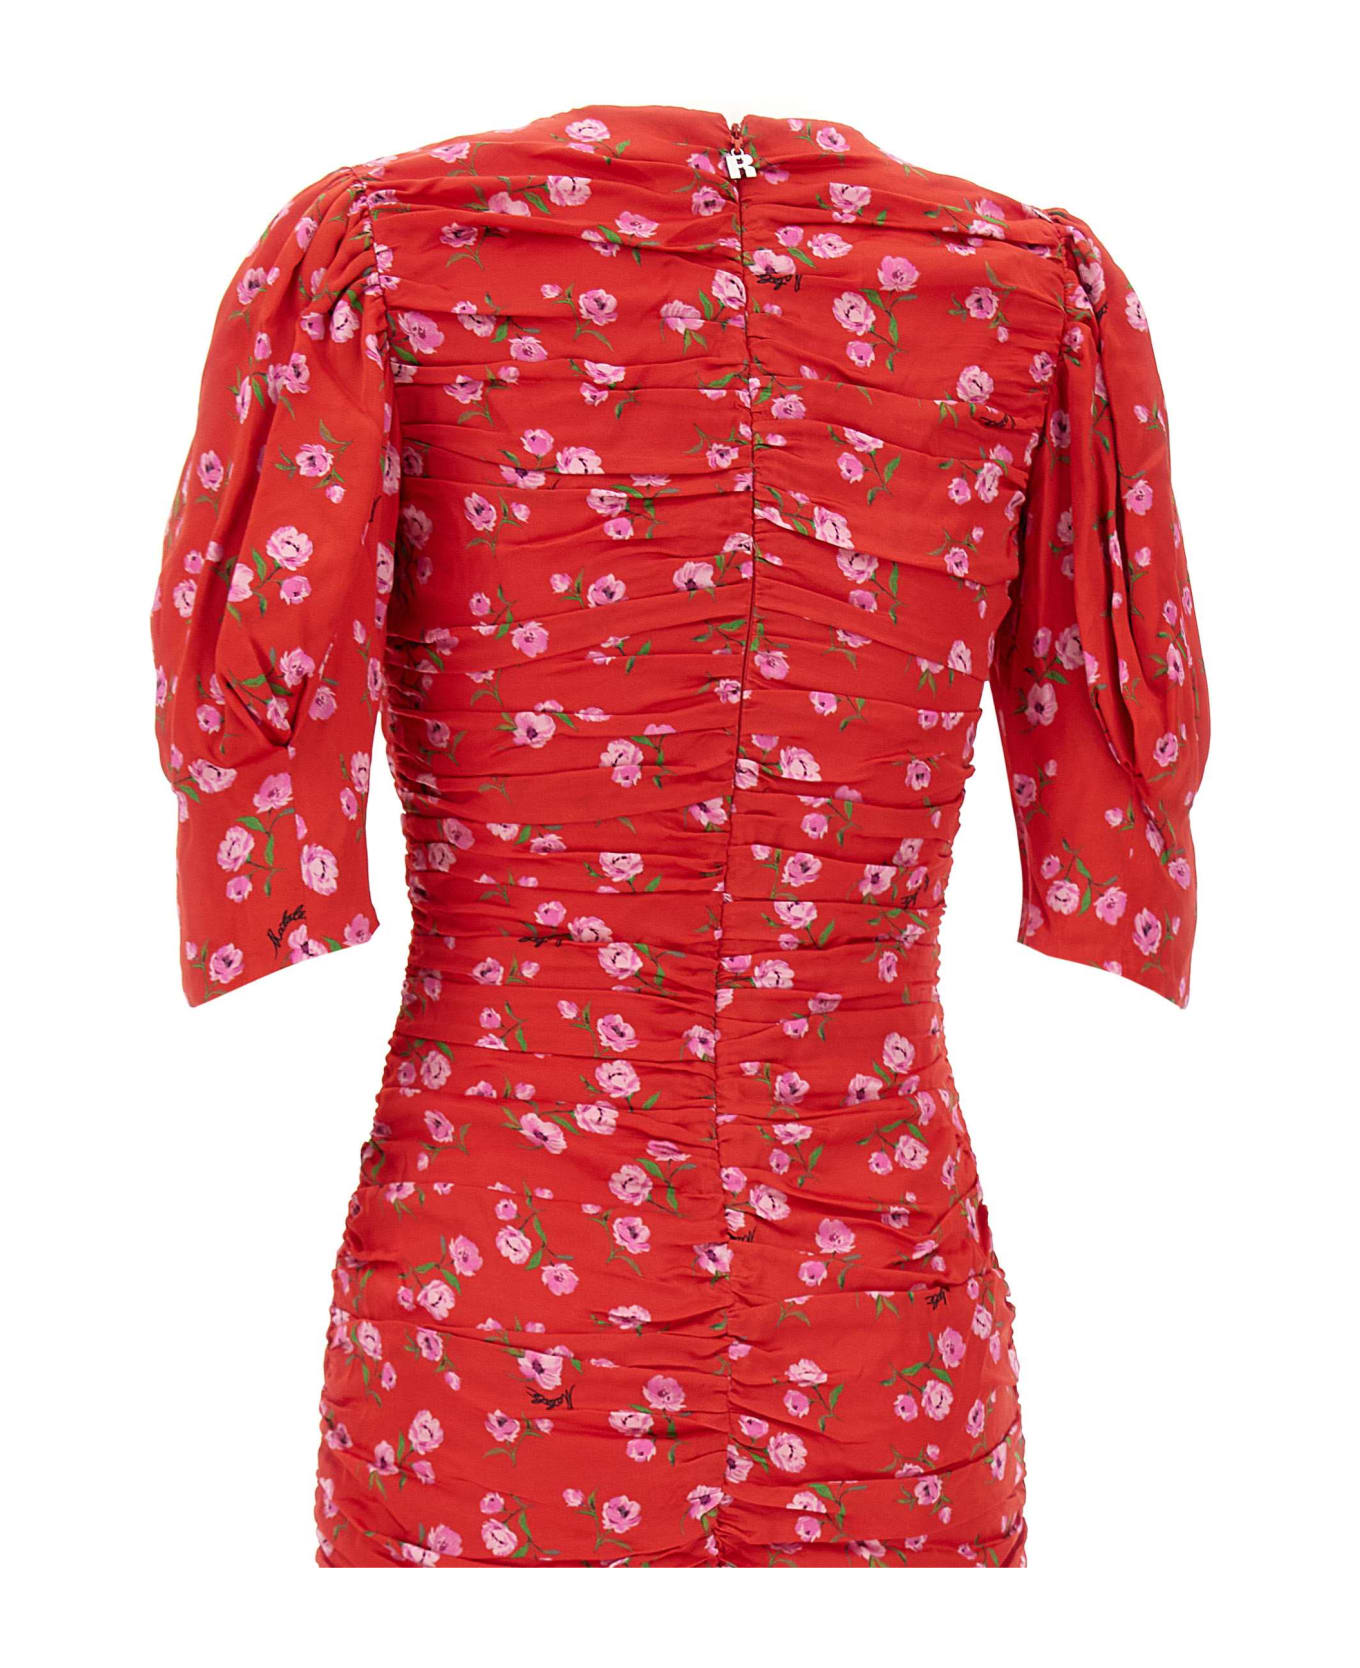 Rotate by Birger Christensen "printed Mini" Viscose Crepe Dress - RED